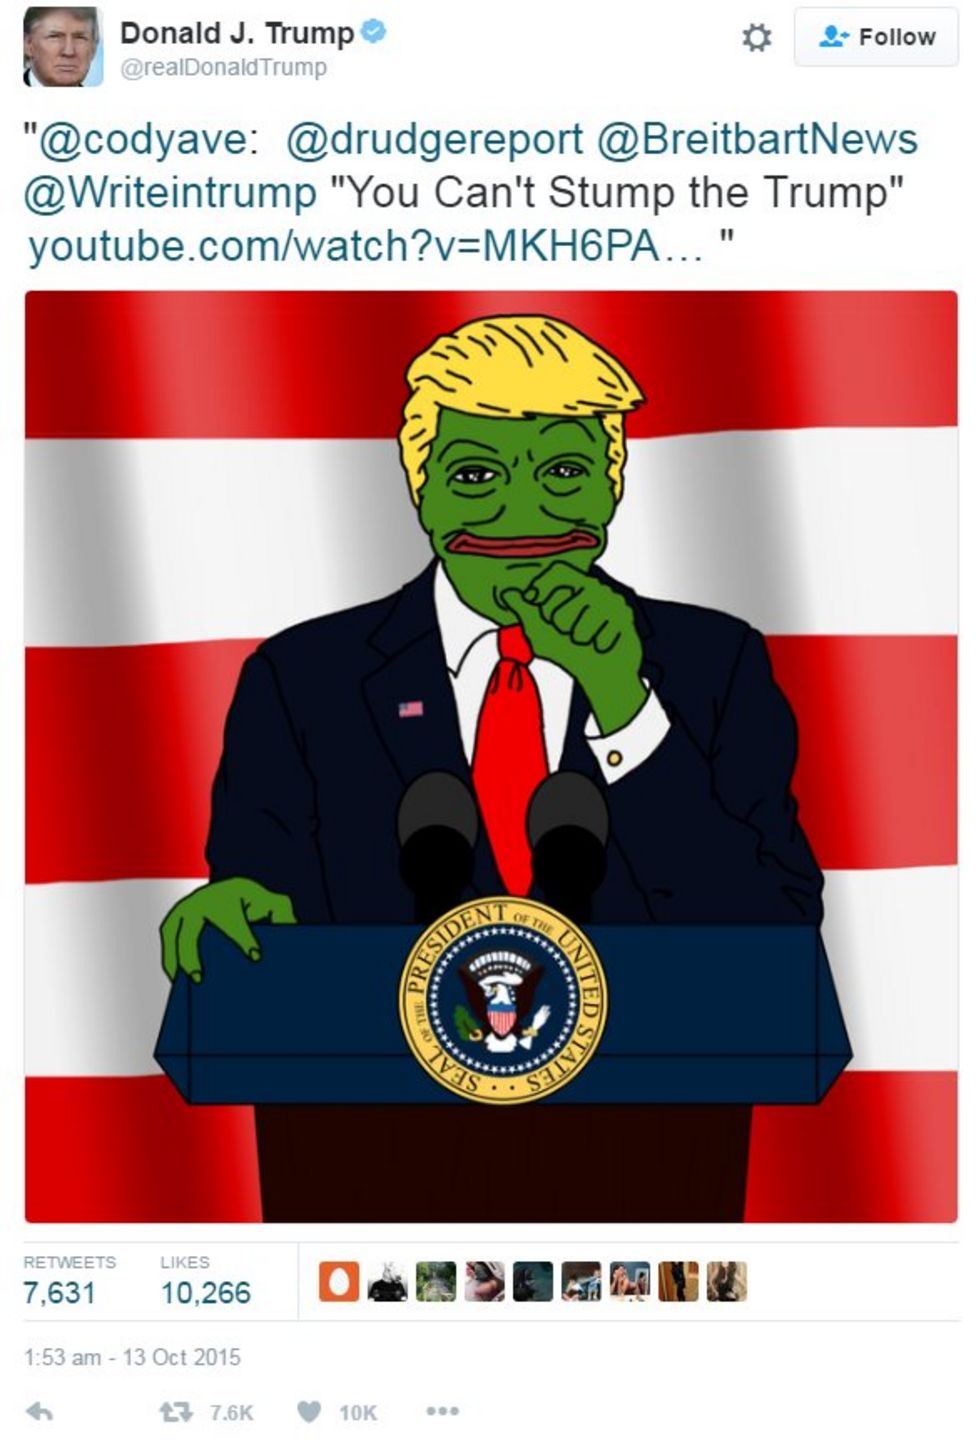 Donald Trump is iconised through the Pepe the Frog meme by the far right and hate groups